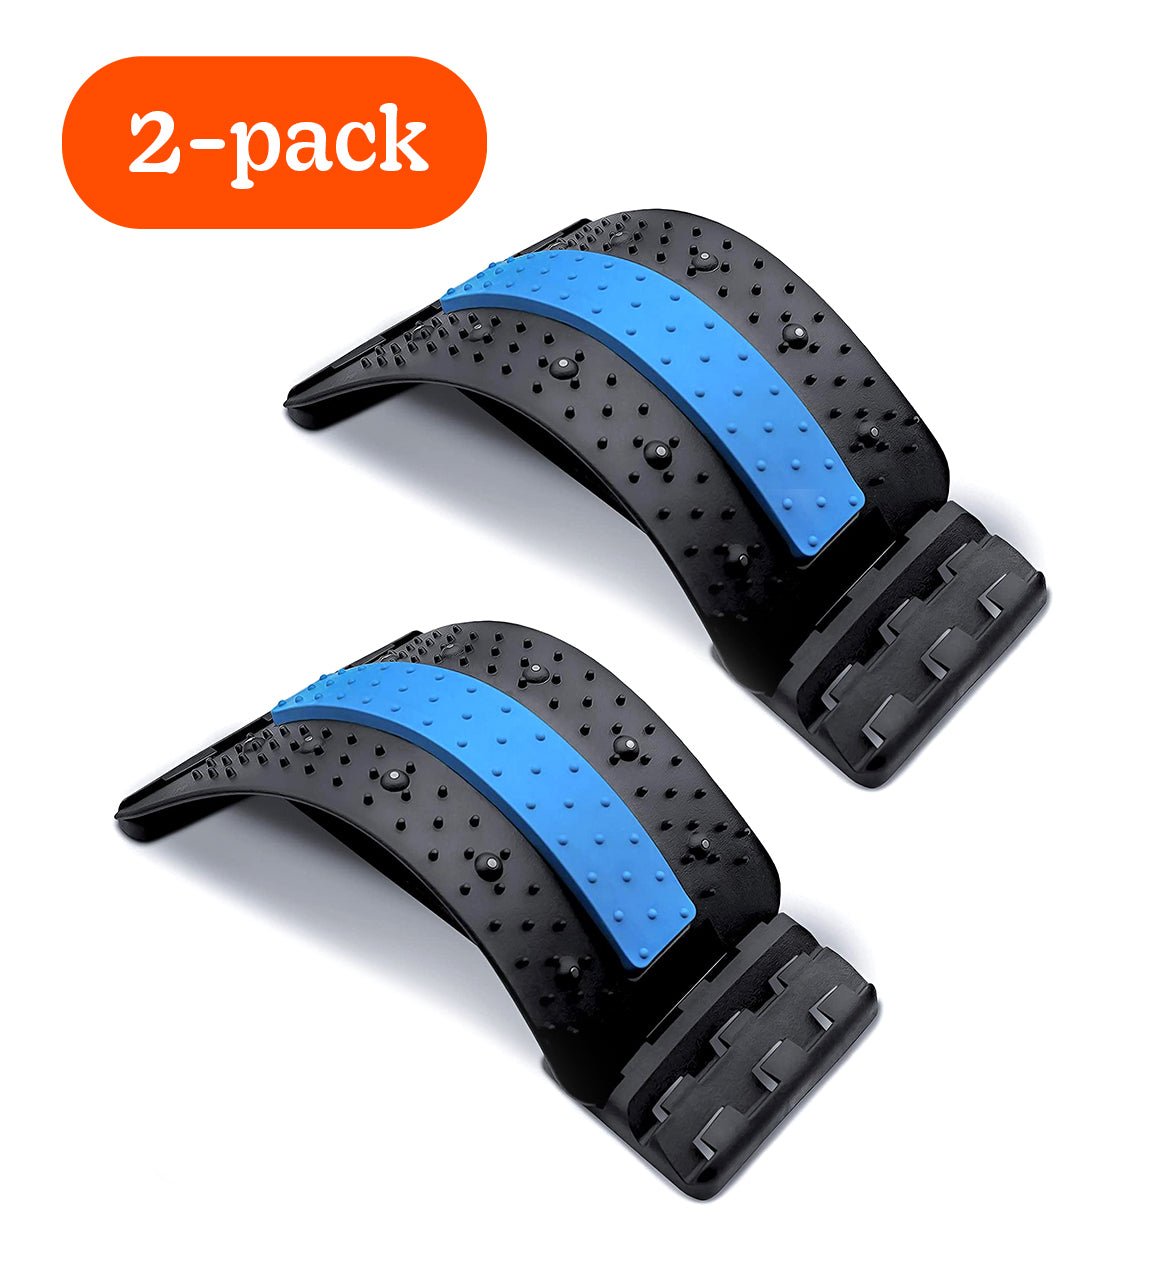 Necklow Back Relaxer 2-Pack